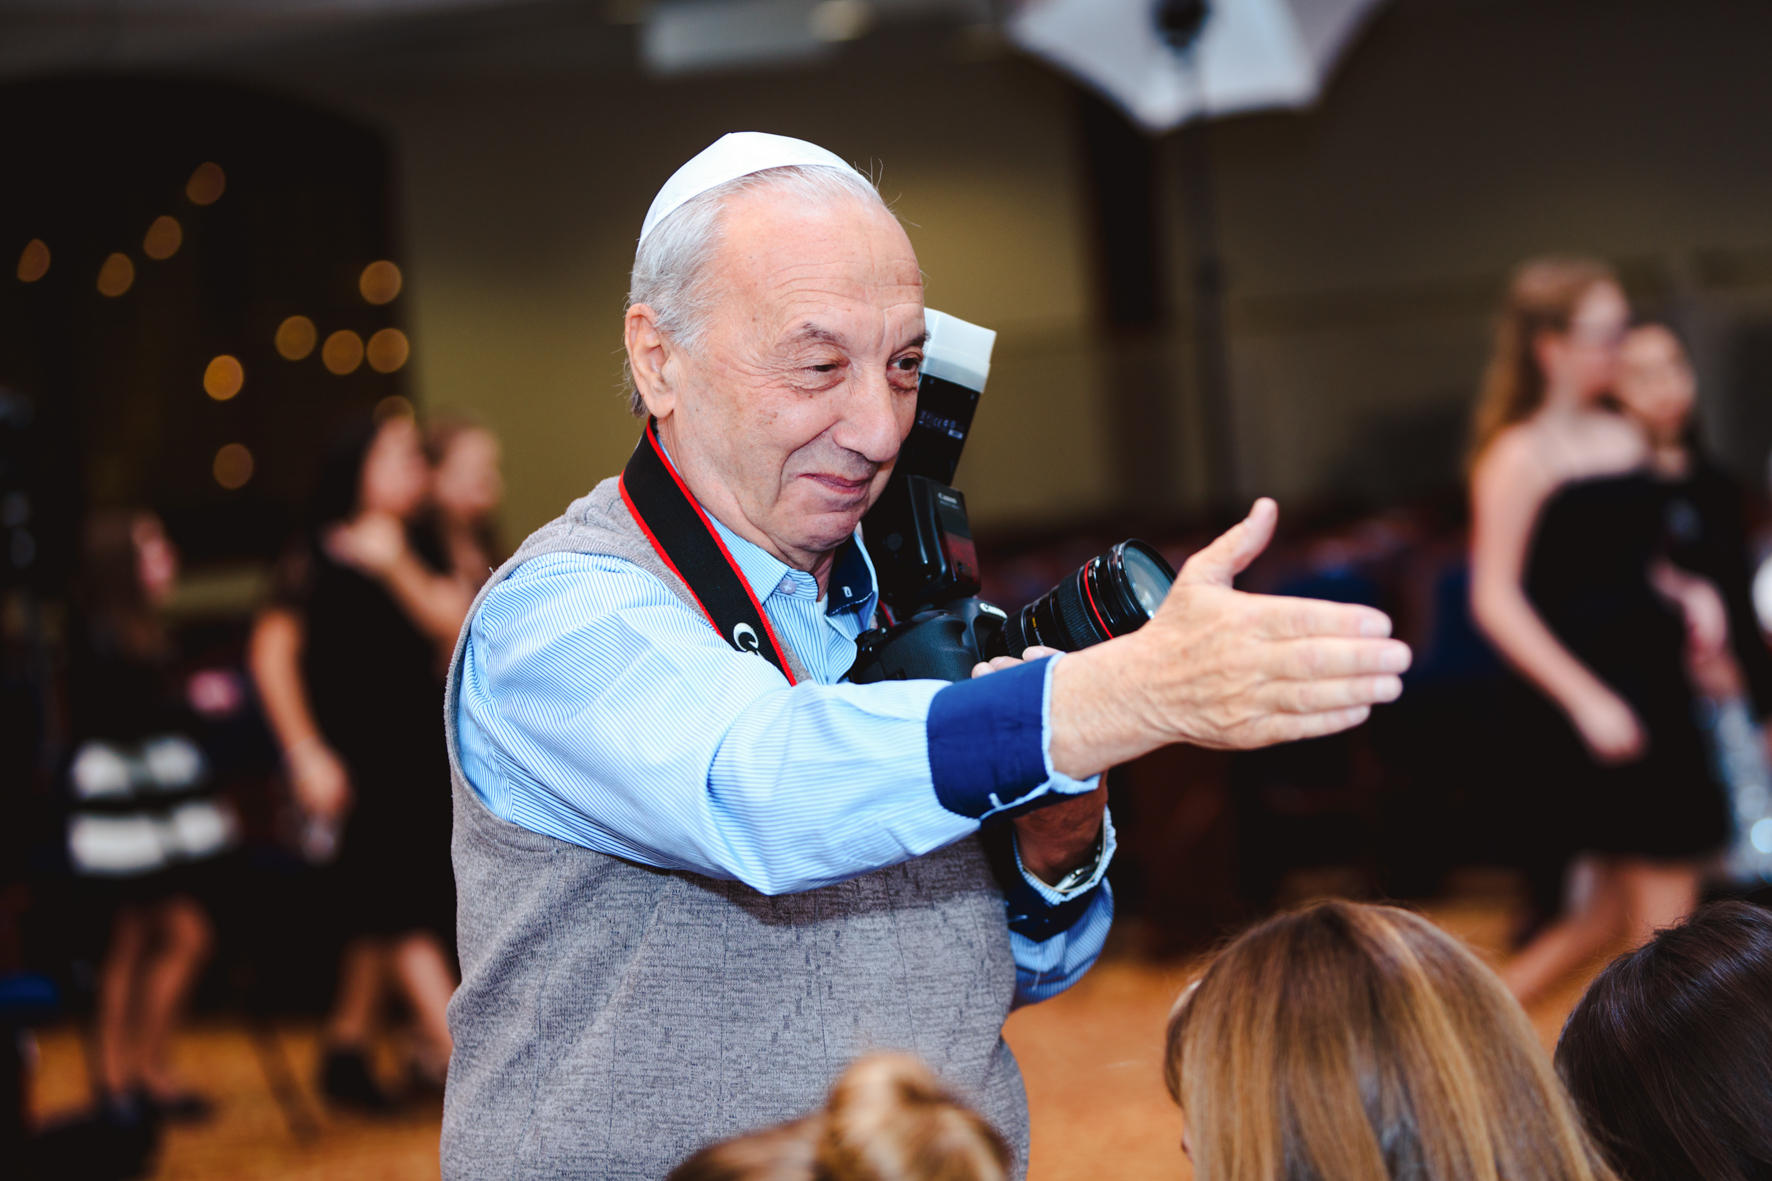 Bar / Bat Mitzvah shooting with best photographers and professional videographers team – VIO IMAGE